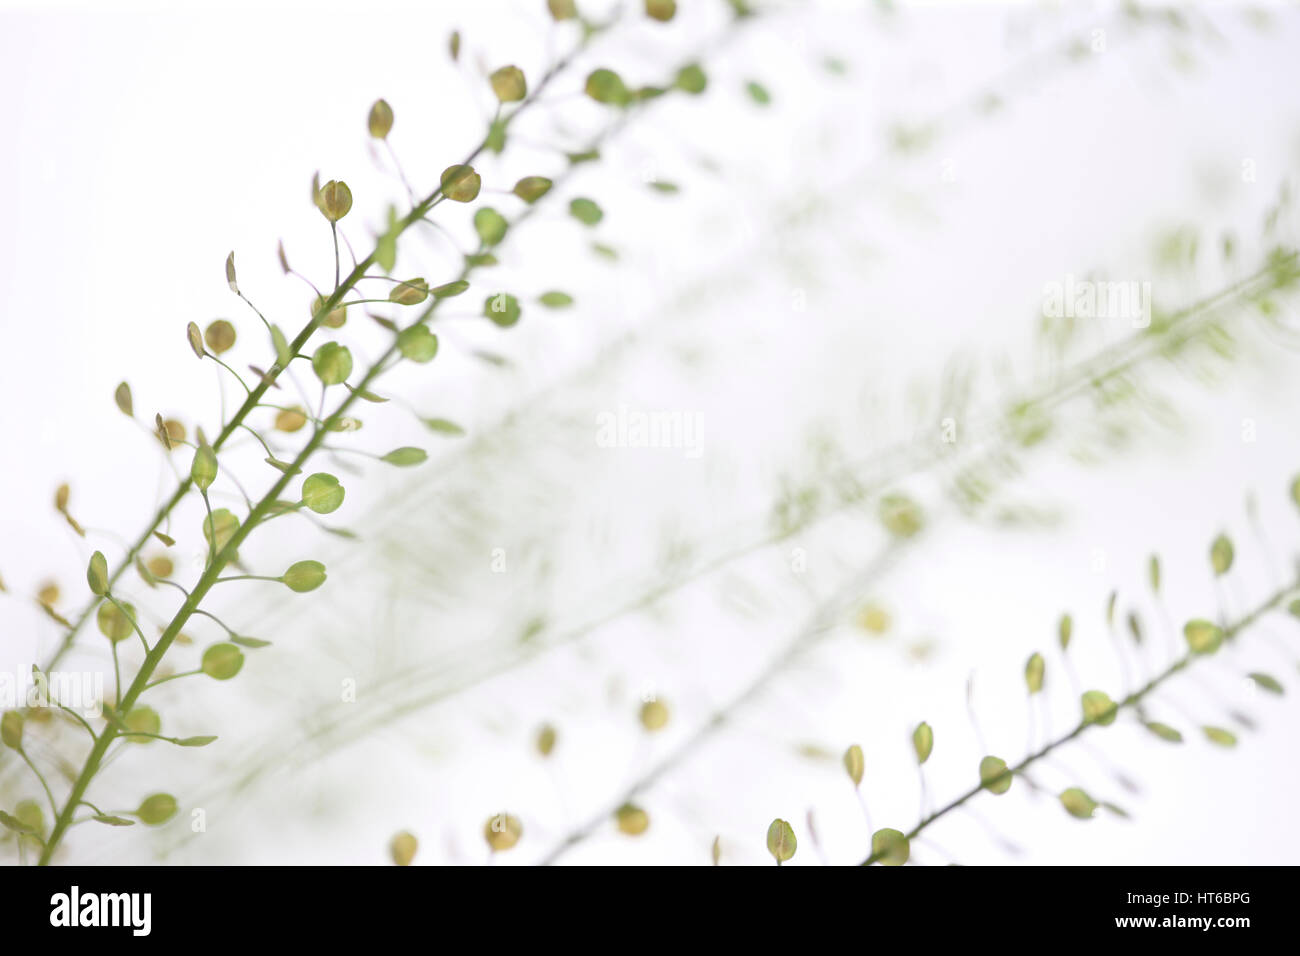 stems of thlaspi still life commonly known as field penny-cress Jane Ann Butler Photography  JABP1871 Stock Photo